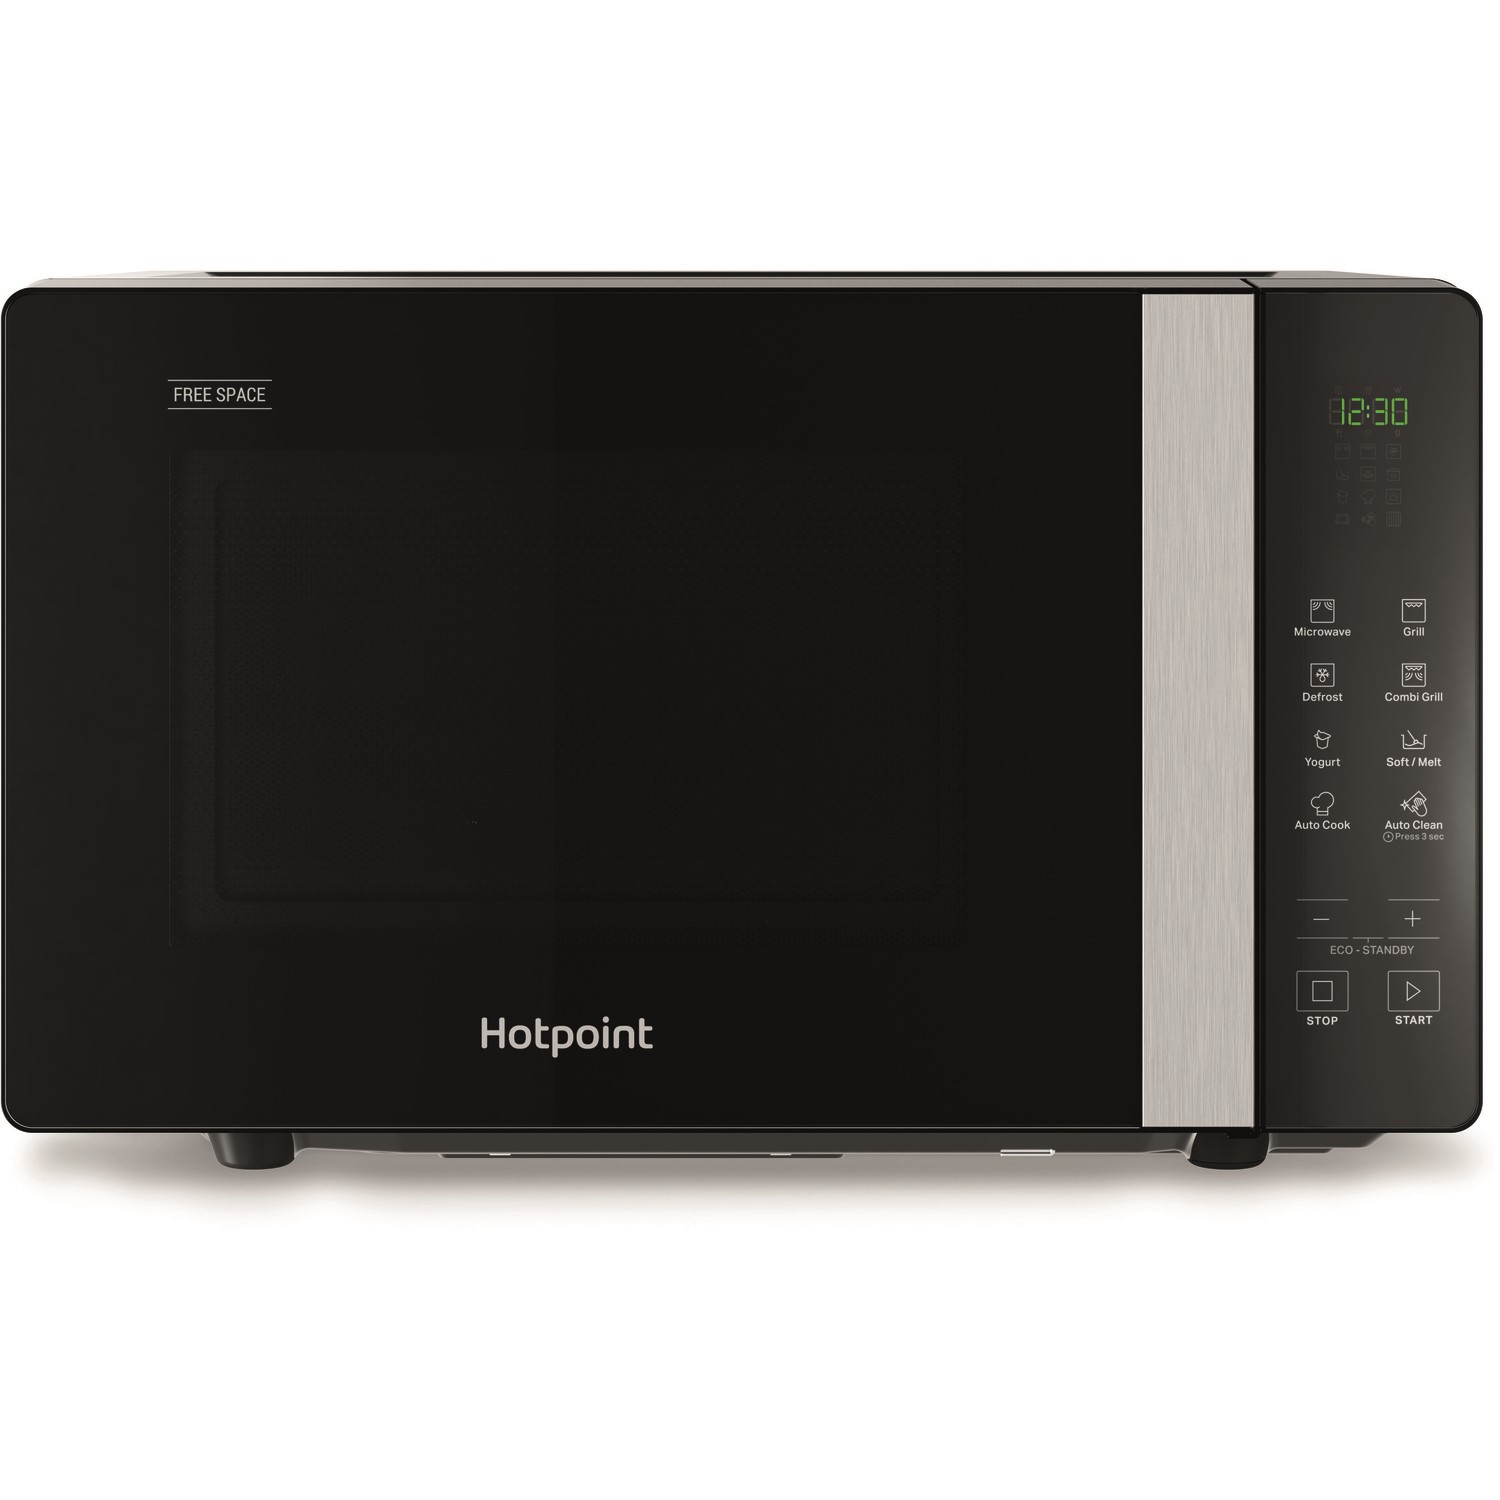 Refurbished Hotpoint MWHF203B 20L With Grill 800W Microwave Oven Black